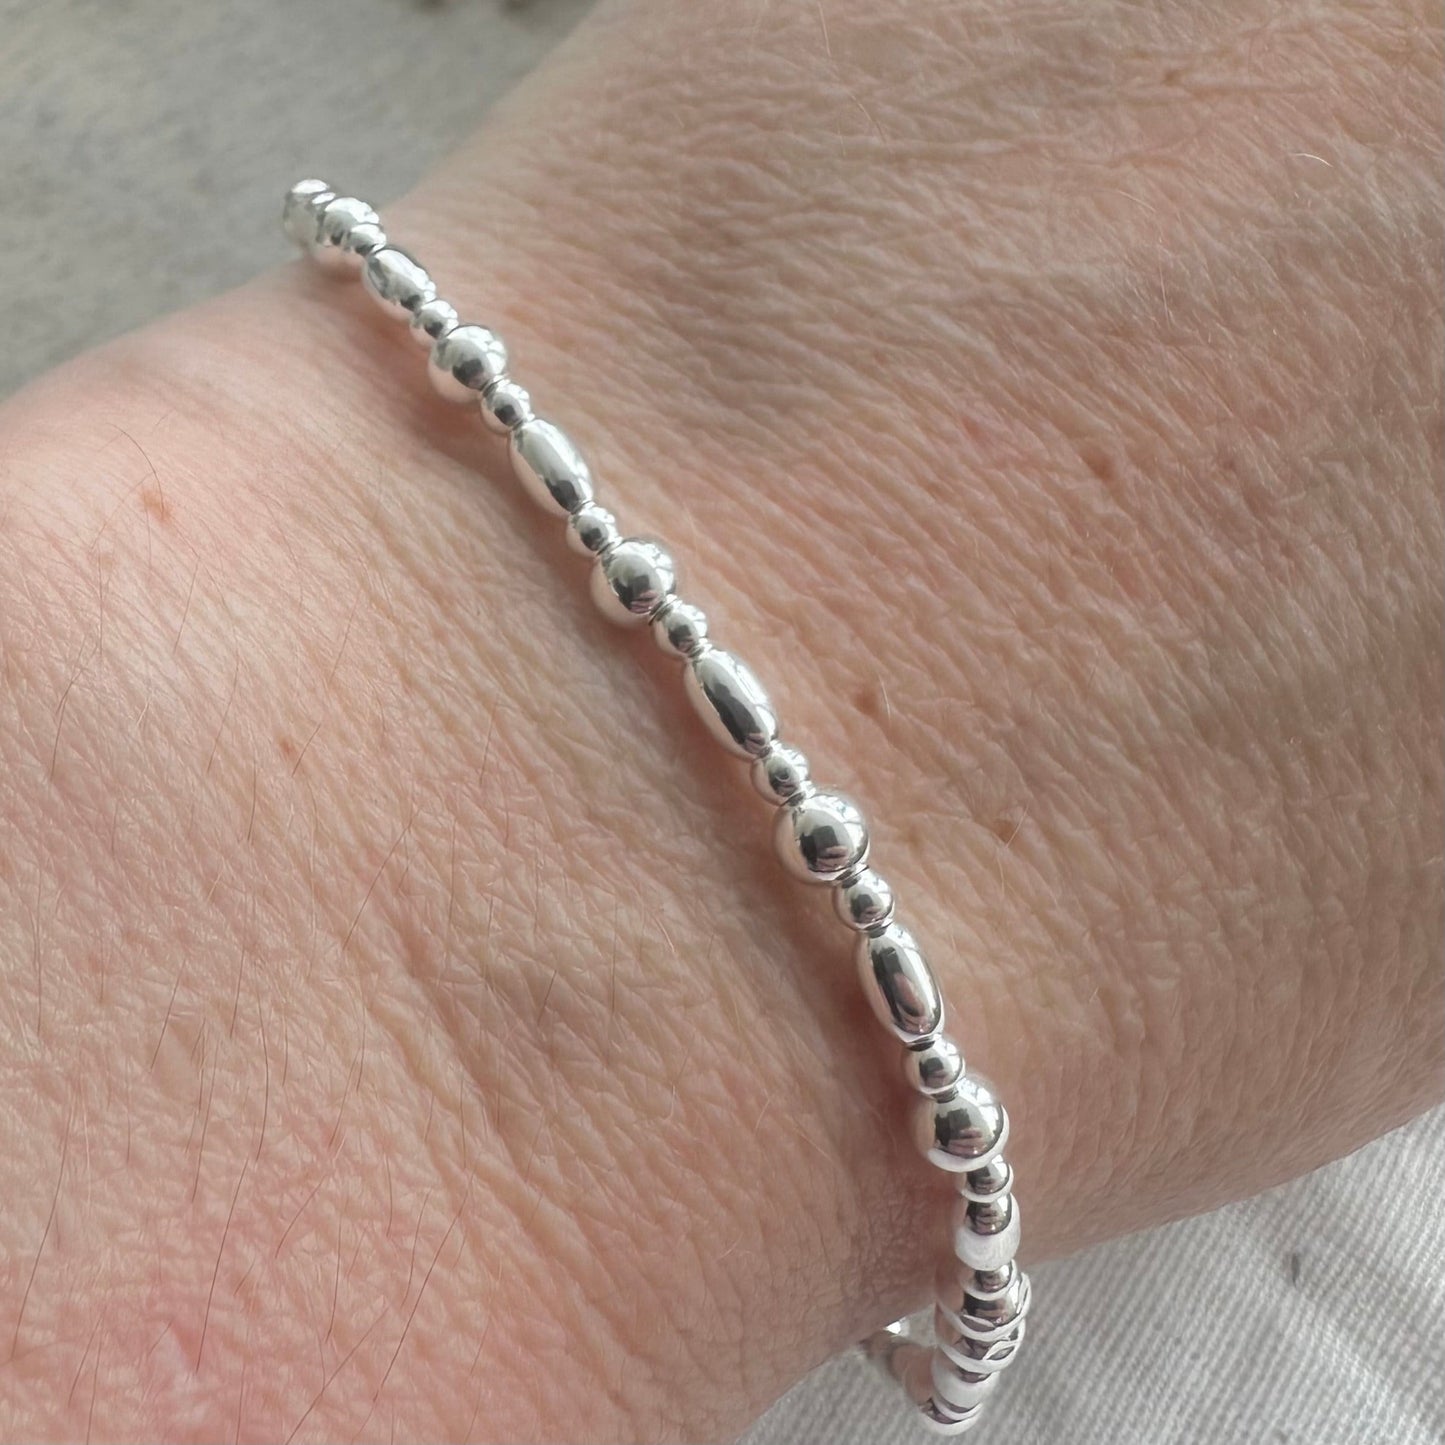 Stretchy Beaded Bracelet with oval beads for Layering, Sterling Silver elastic bracelet